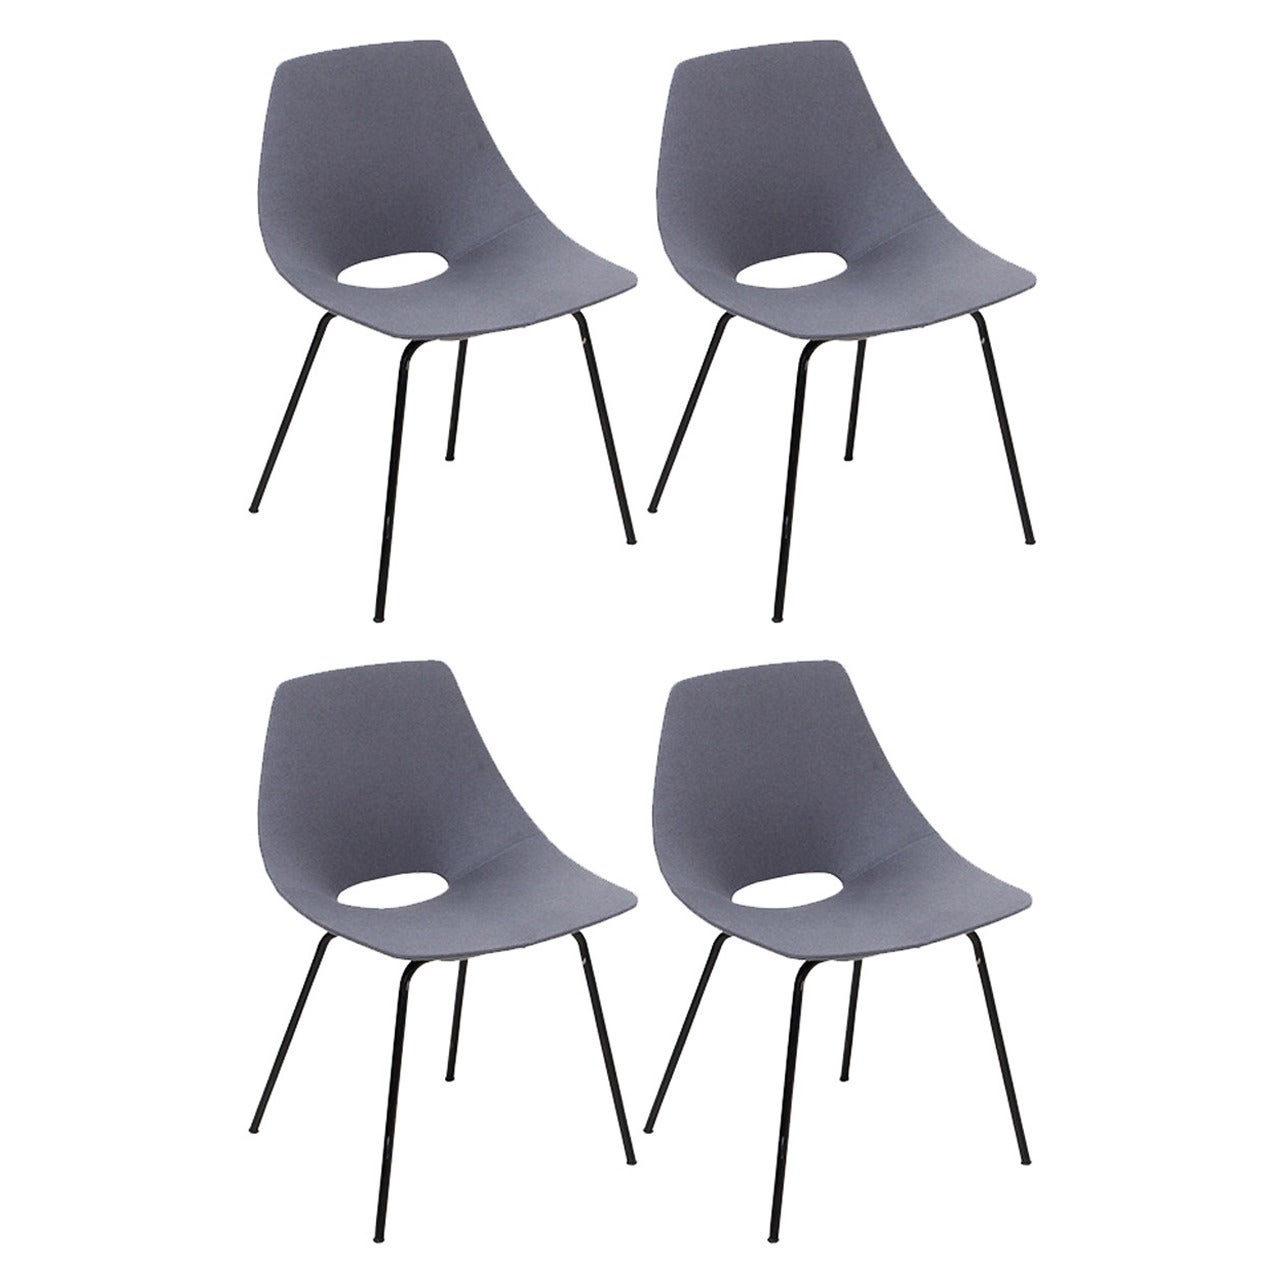 4 Grey "Tonneau" Chairs by Pierre Guariche Edited by Steiner in 1954